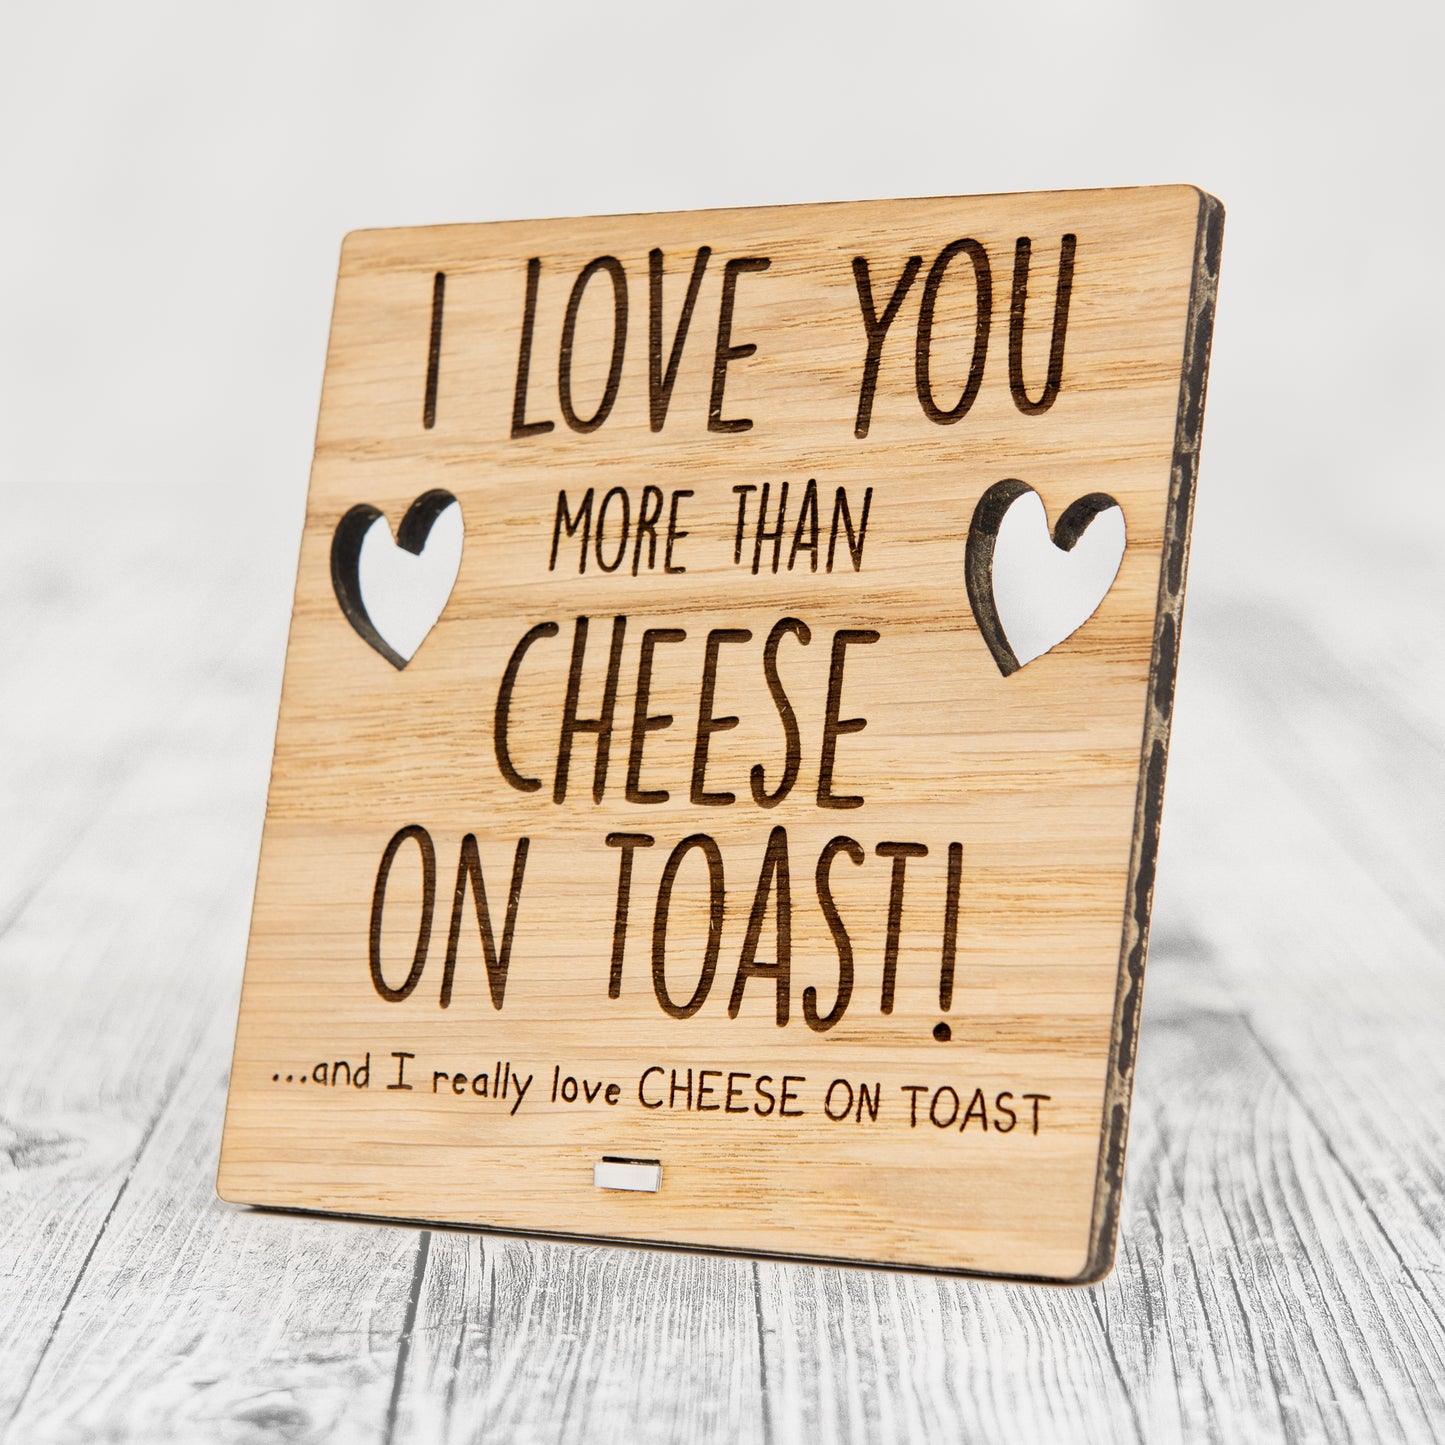 I Love You More Than CHEESE ON TOAST - Wooden Valentine's Day Plaque